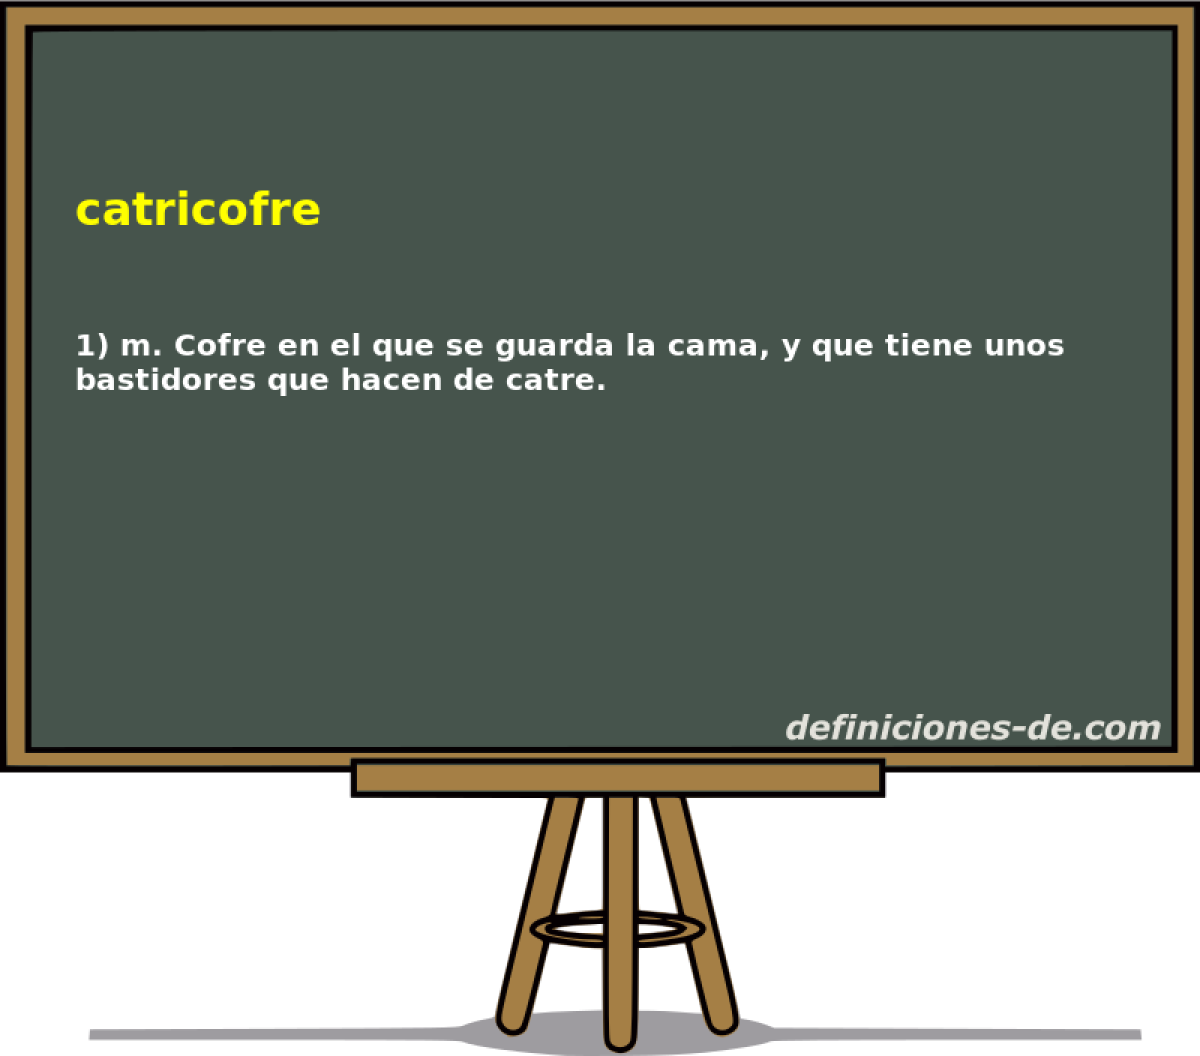 catricofre 